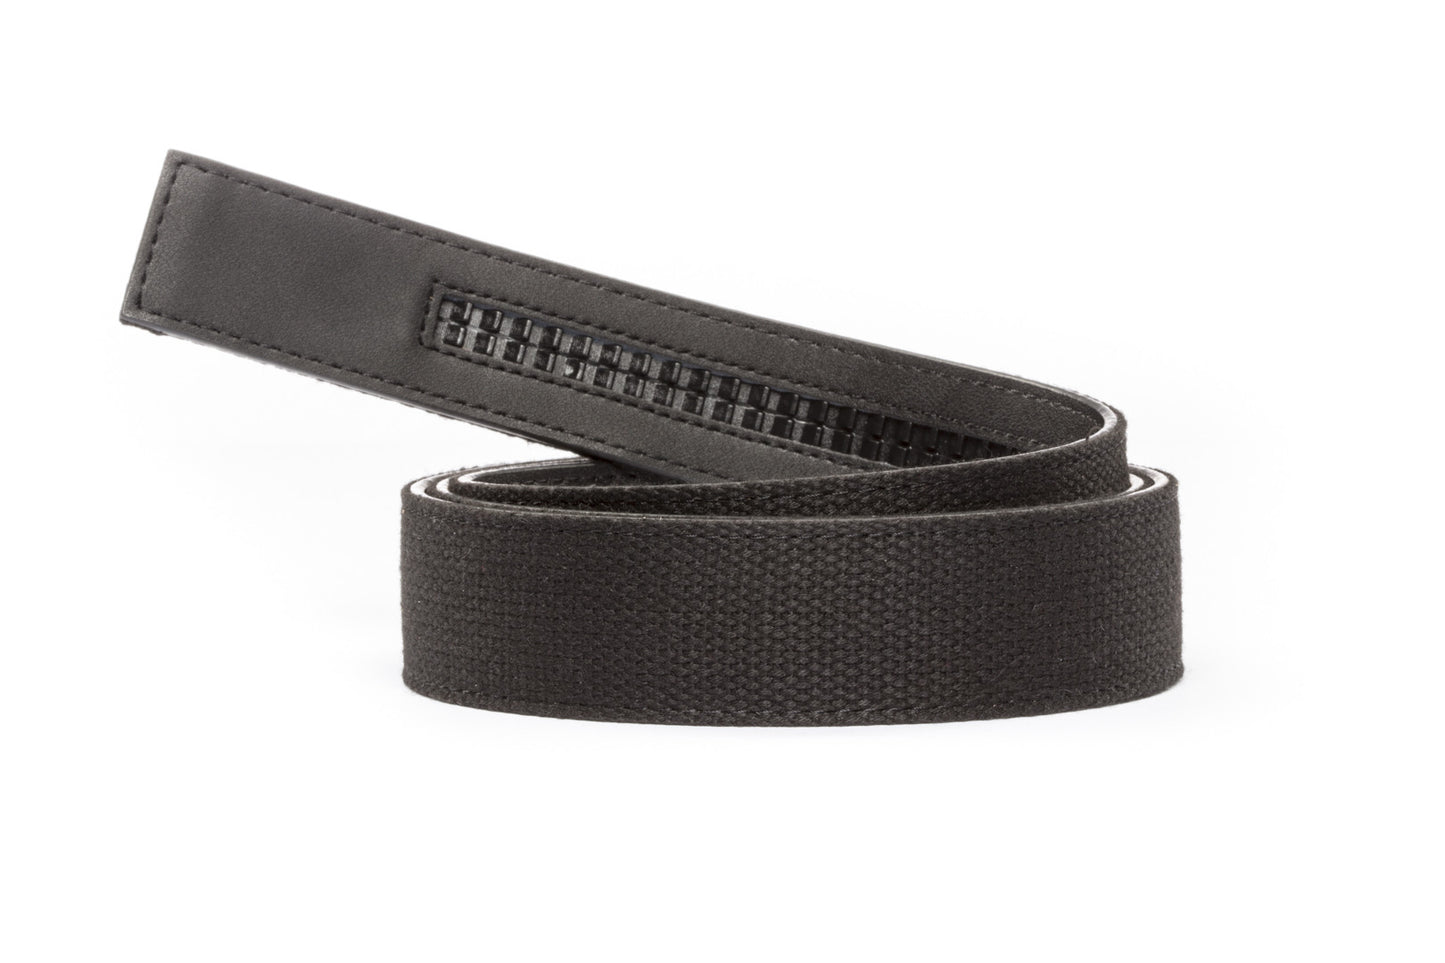 Men's XL canvas belt strap in black, 1.5 inches wide, casual look, microfiber back